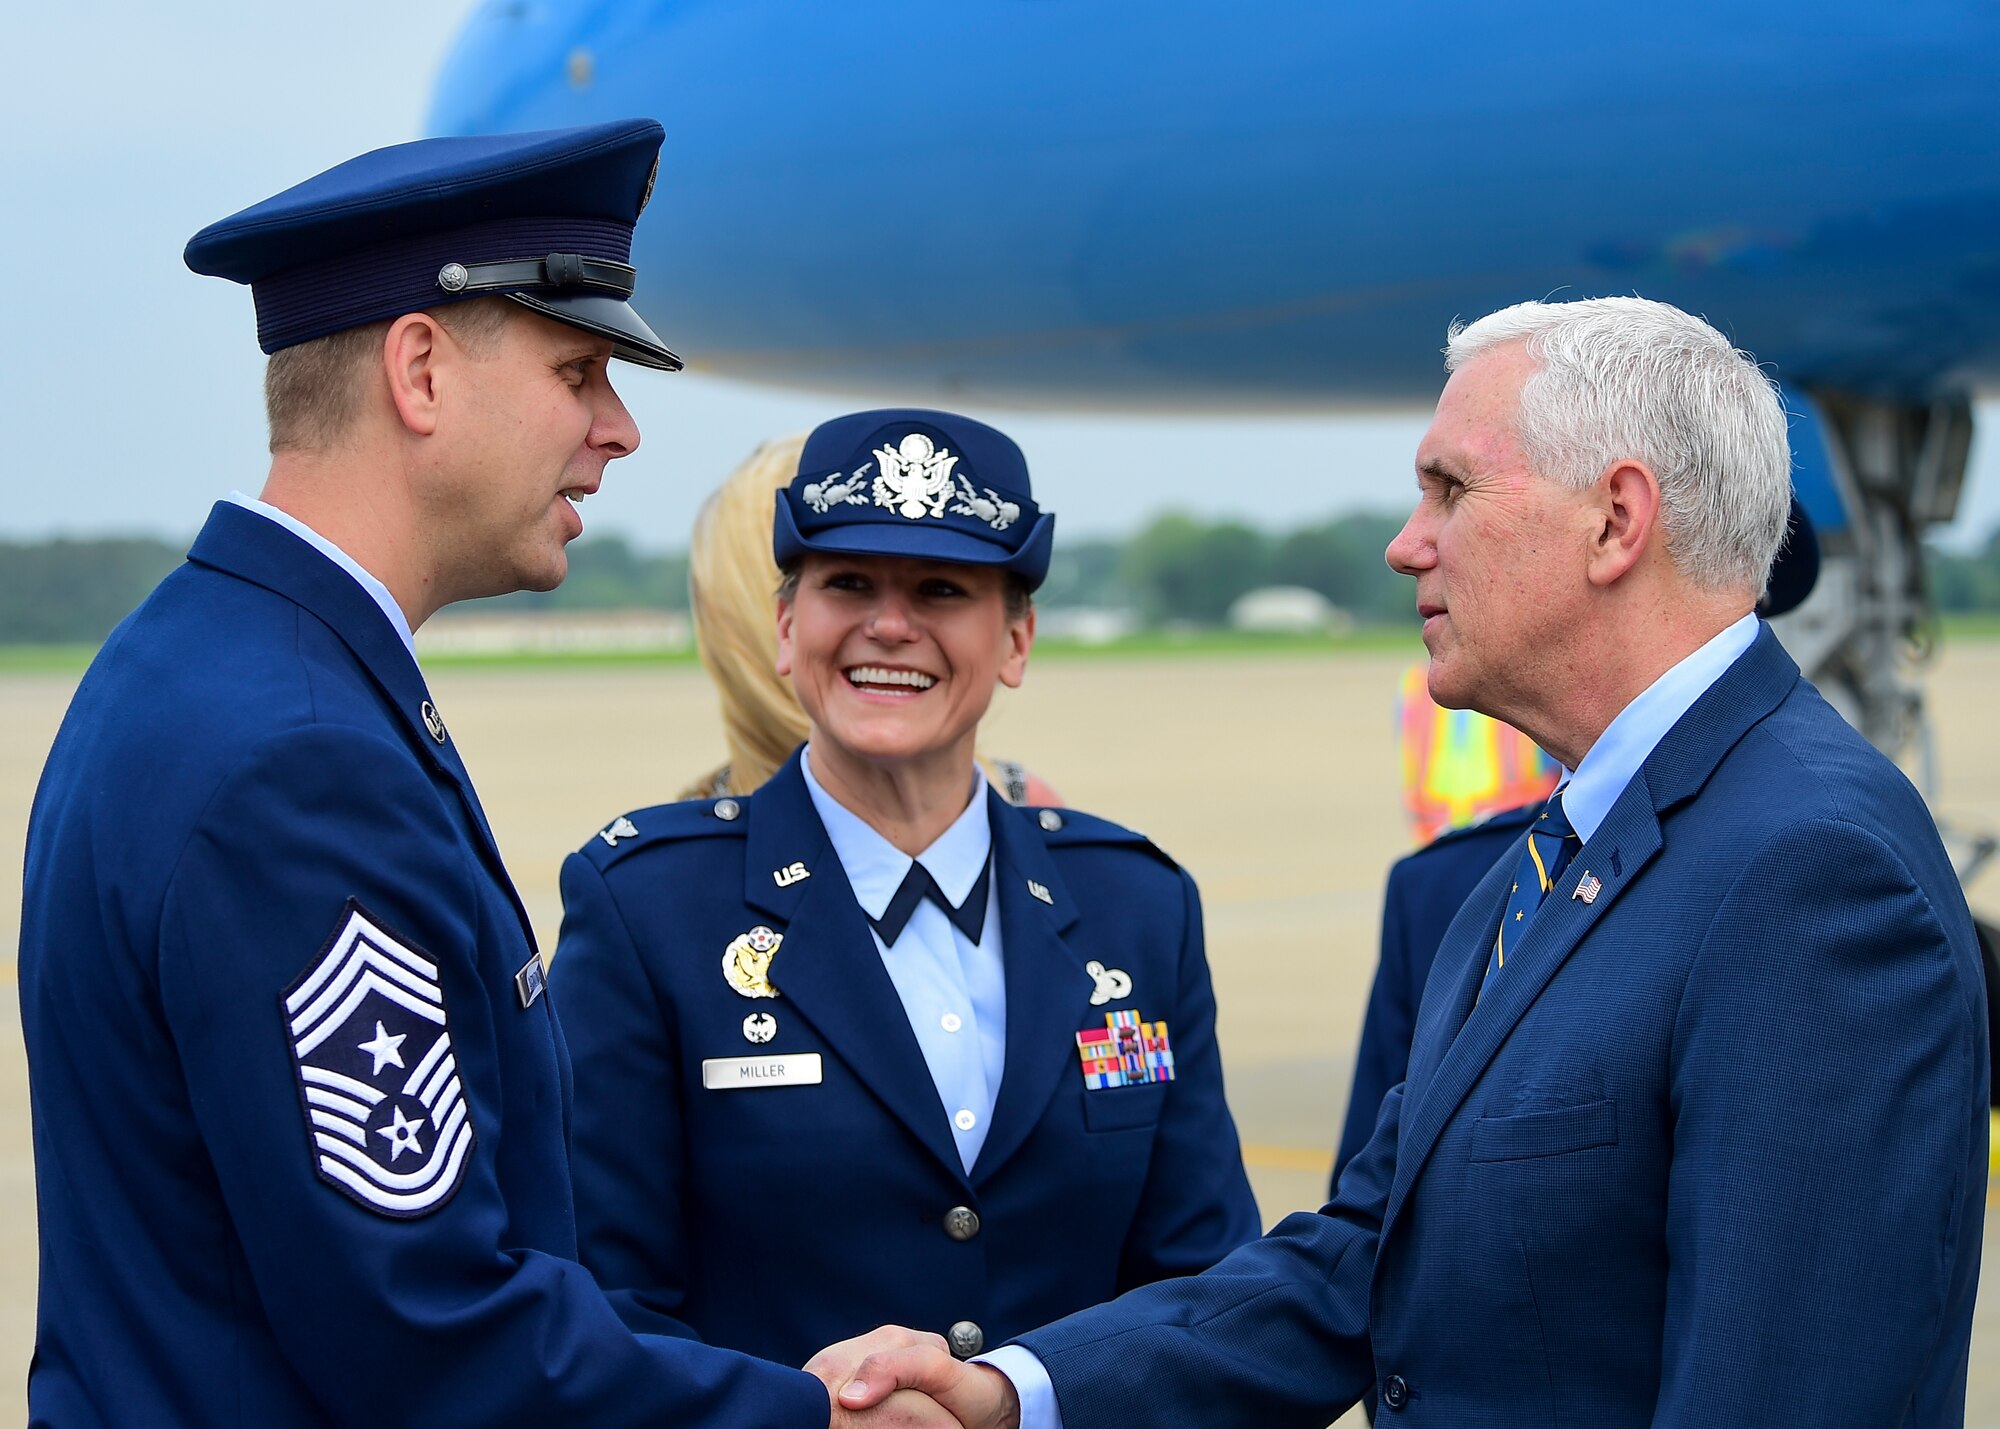 U.S. Vice President Michael R. Pence is greeted by U.S. Air Force Chief Master Sgt. Kennon Arnold, 633rd Air Base Wing command chief, and U.S. Air Force Col. Caroline Miller, 633rd ABW commander, at Joint Base Langley-Eustis, Va., April 29, 2017. After visiting JBLE, Pence presented a keynote speech for the Christening Ceremony of the U.S. Navy’s newest attack submarine at the Newport News Shipyard. (U.S. Air Force photo/Senior Airman Derek Seifert)